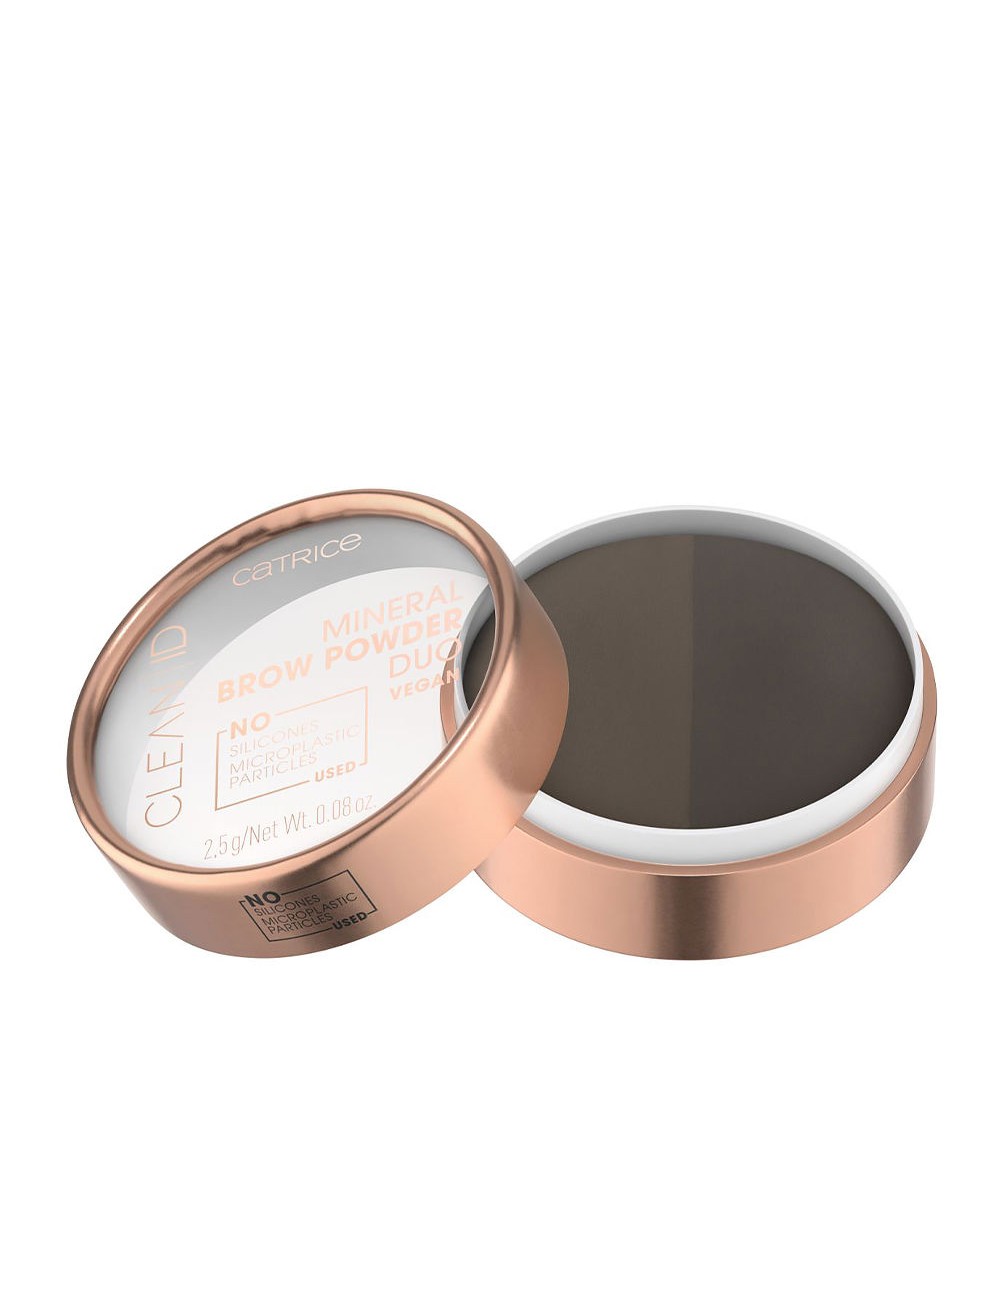 CLEAN ID mineral brow powder duo to